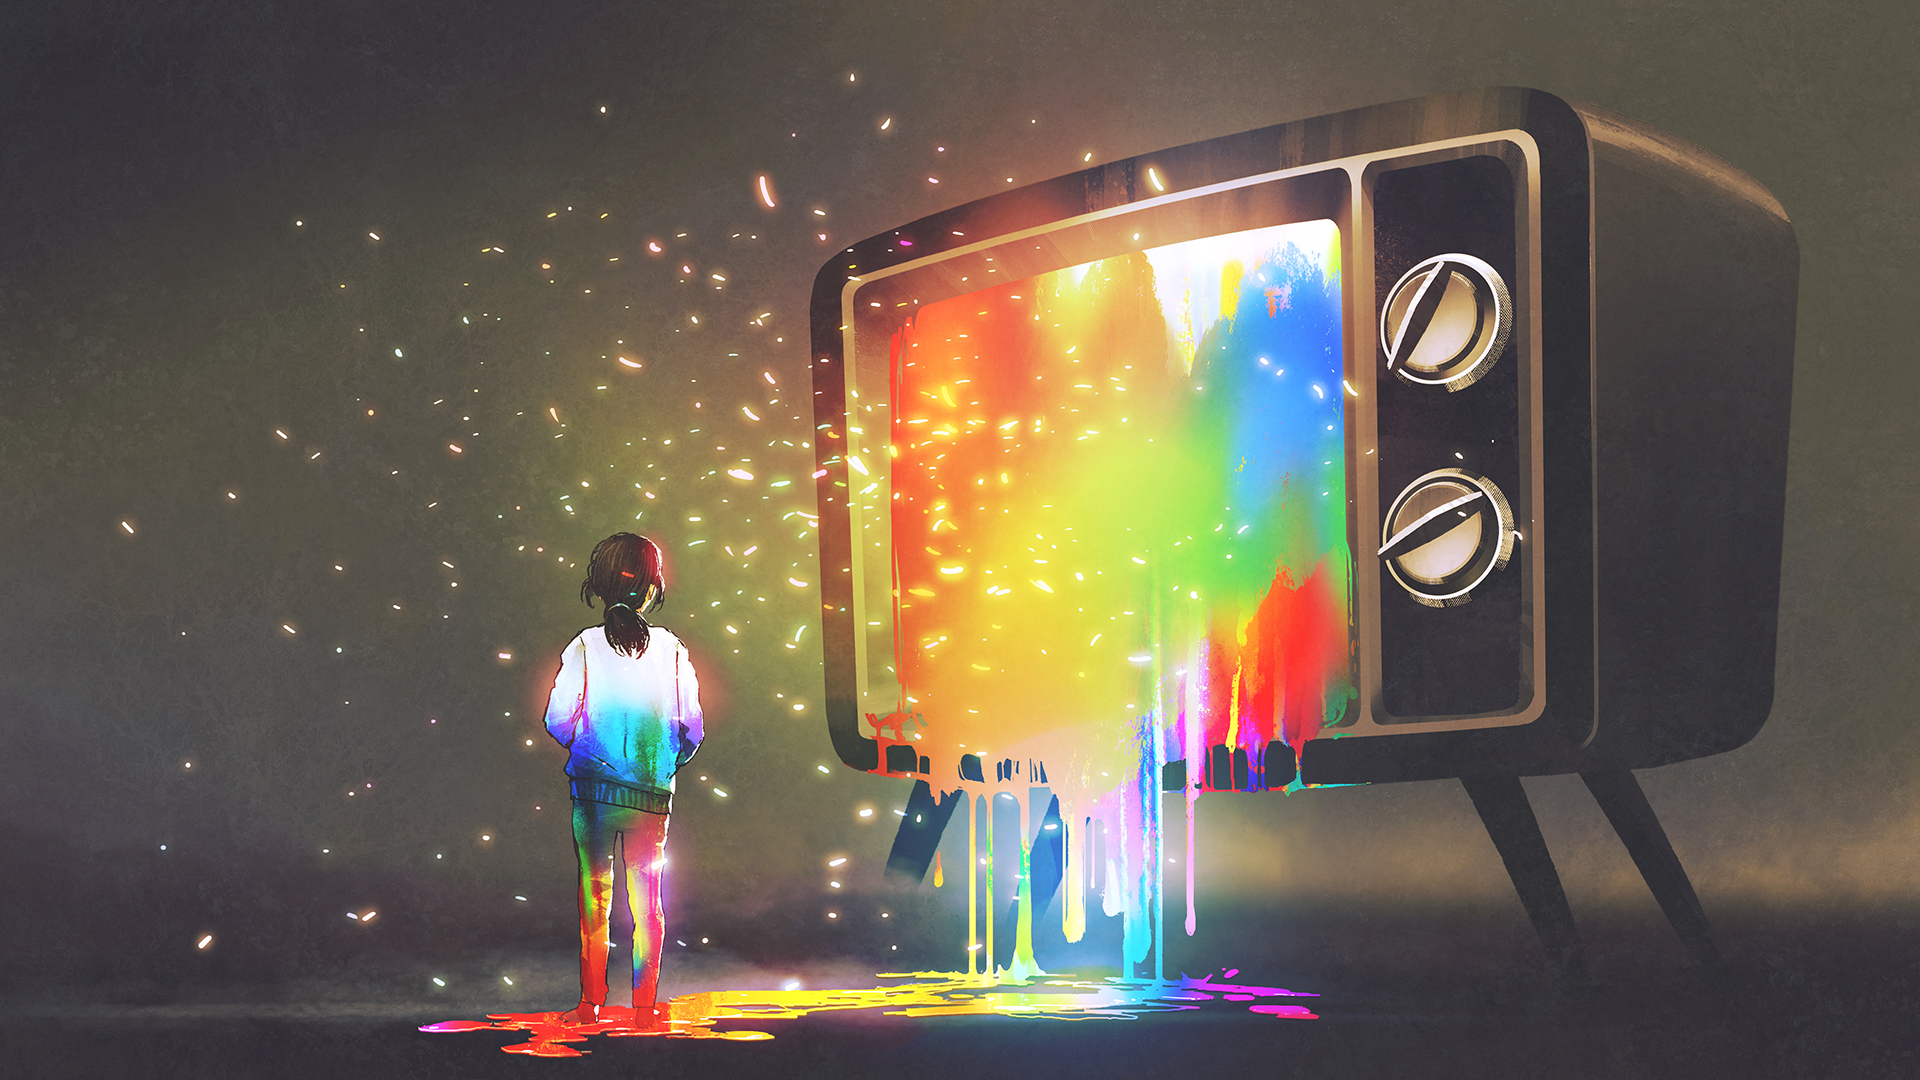 Illustration of a television set speckled with floating lights and the colors of the rainbow. A figure stands to the left of the screen, covered in the same colors.